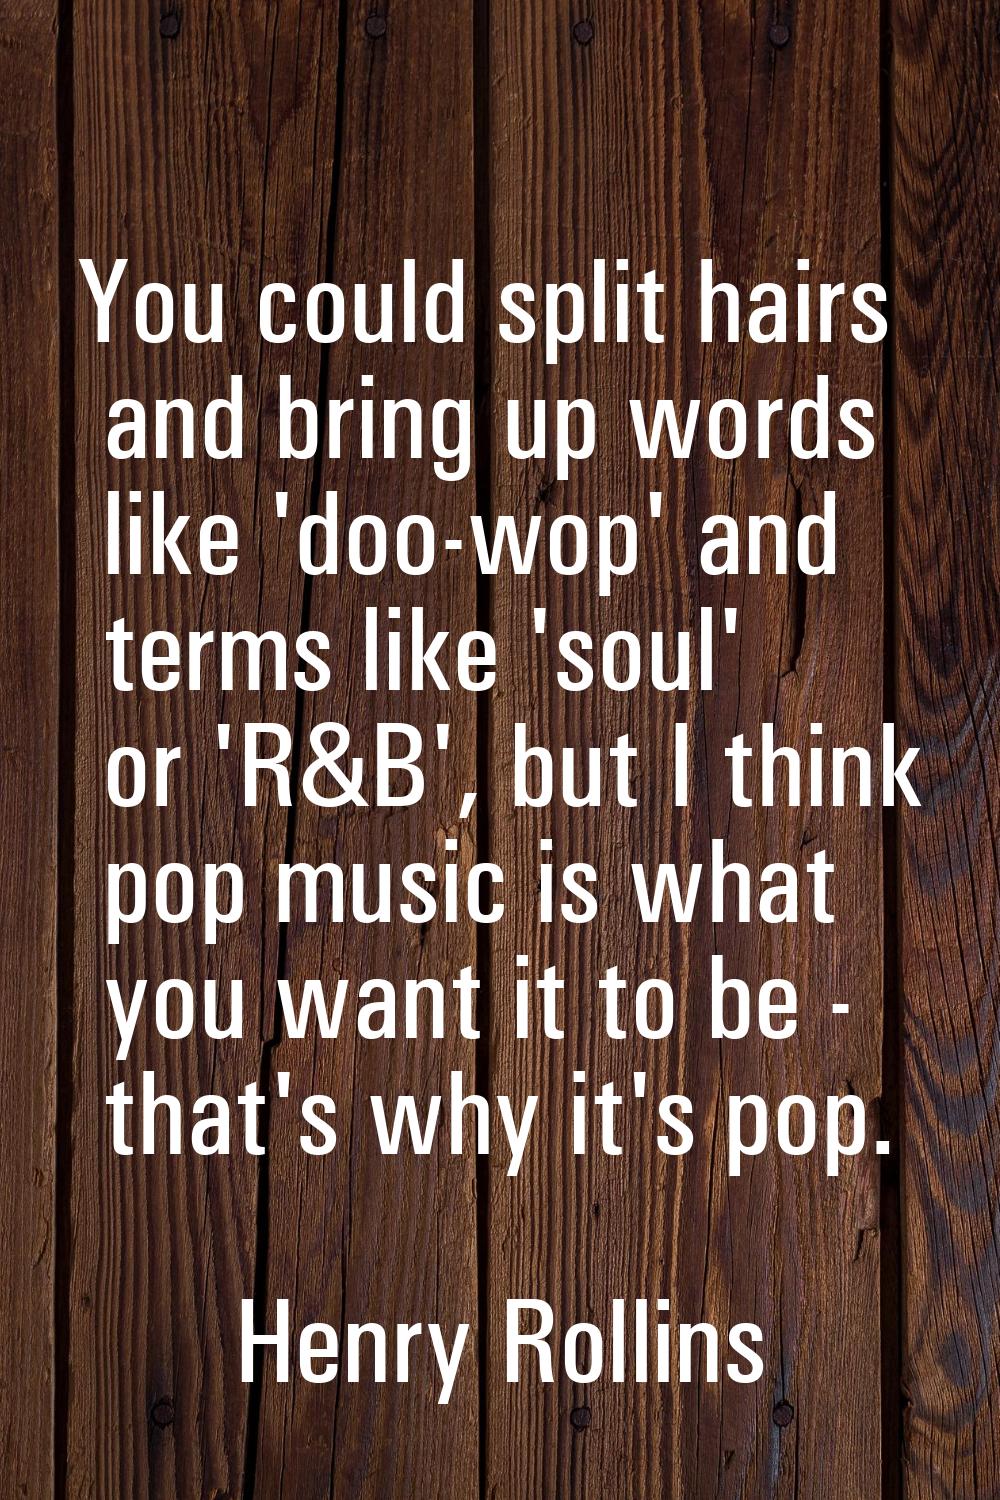 You could split hairs and bring up words like 'doo-wop' and terms like 'soul' or 'R&B', but I think